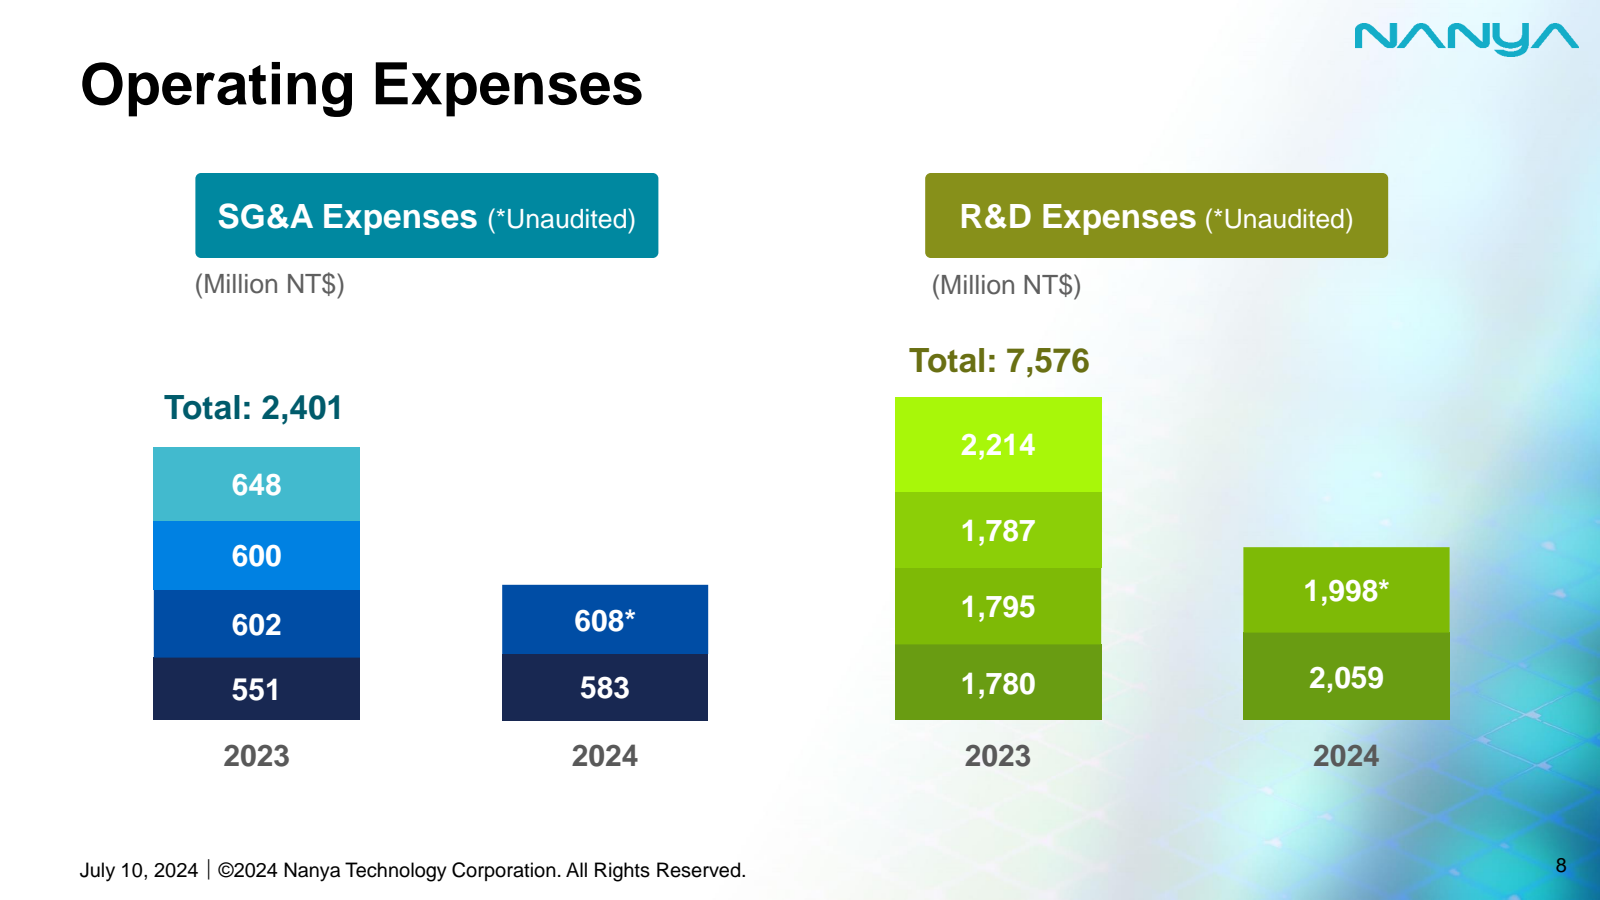 Operating Expenses 
